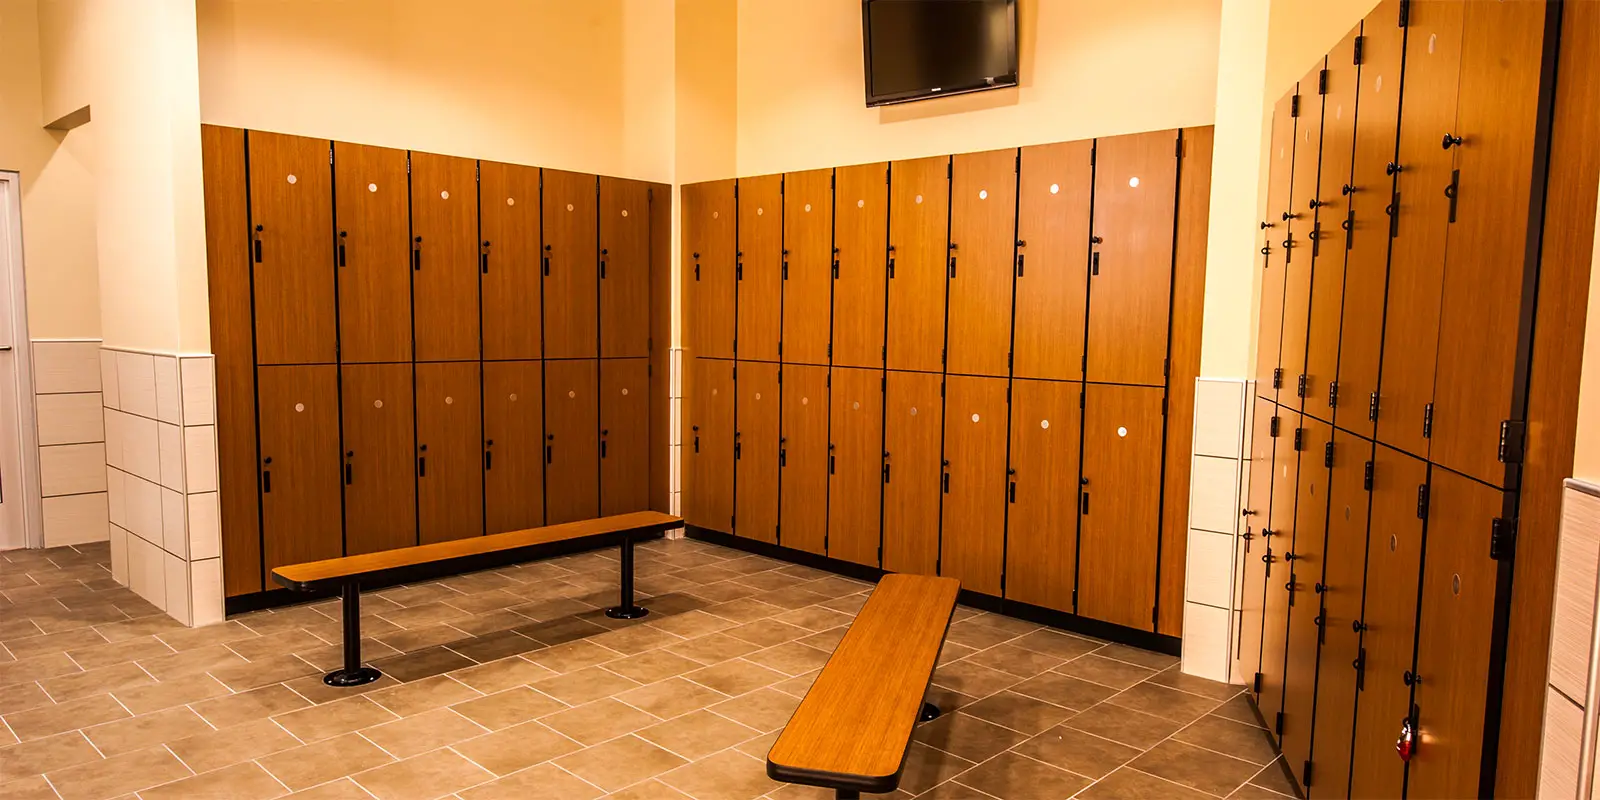 11 Things You D Actually See In The Women S Locker Room If You Were Invisible 11 Points